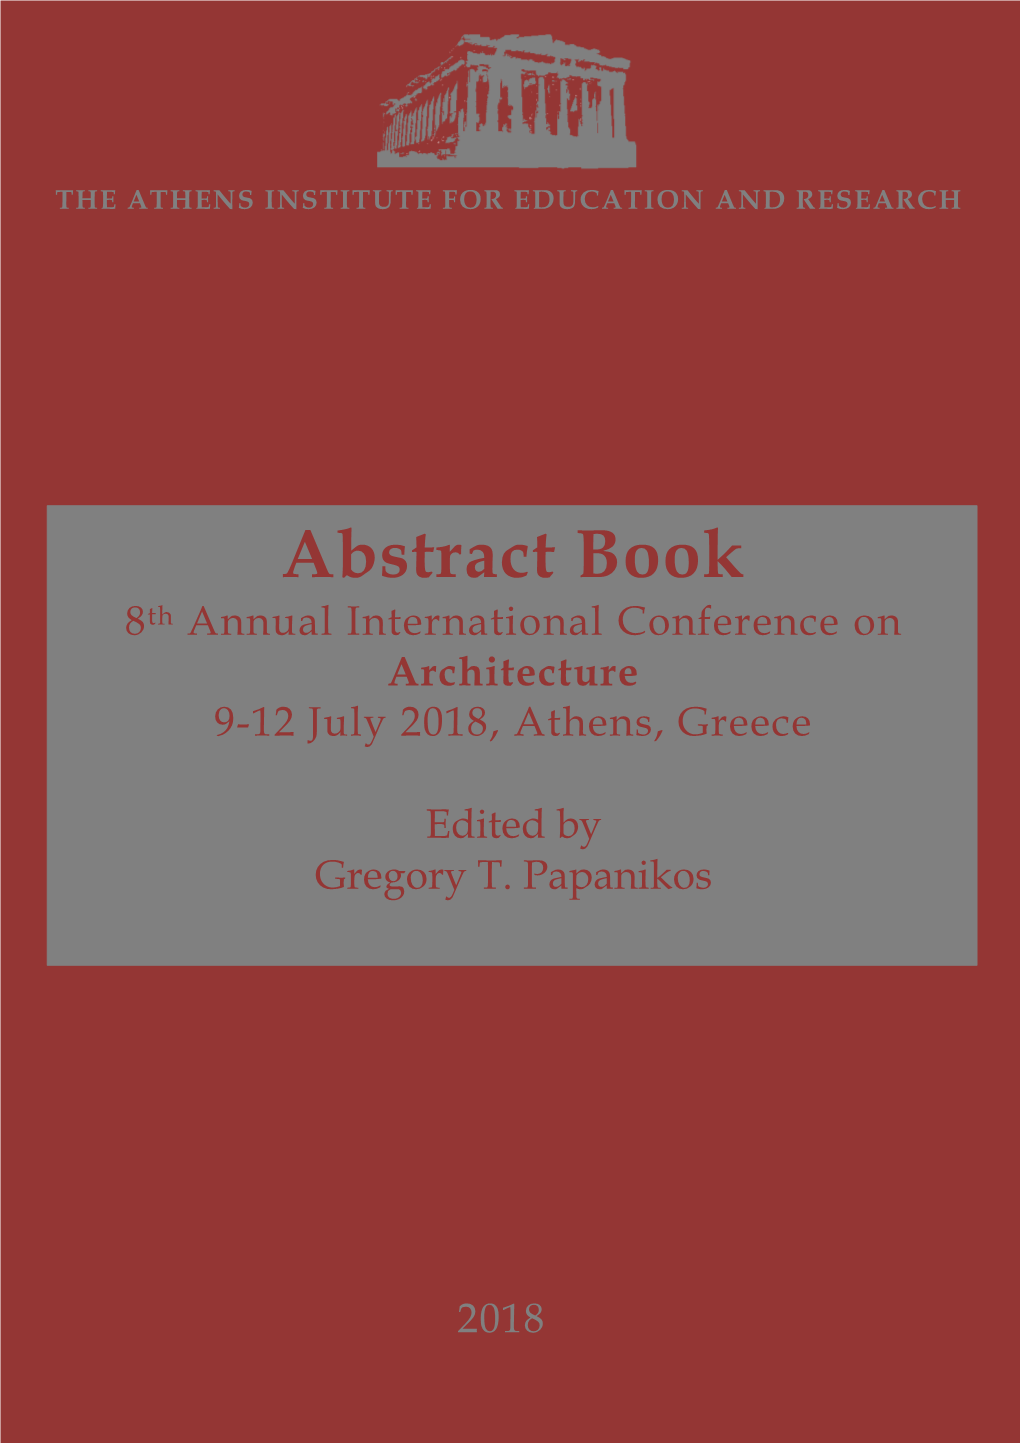 Architecture 9-12 July 2018, Athens, Greece